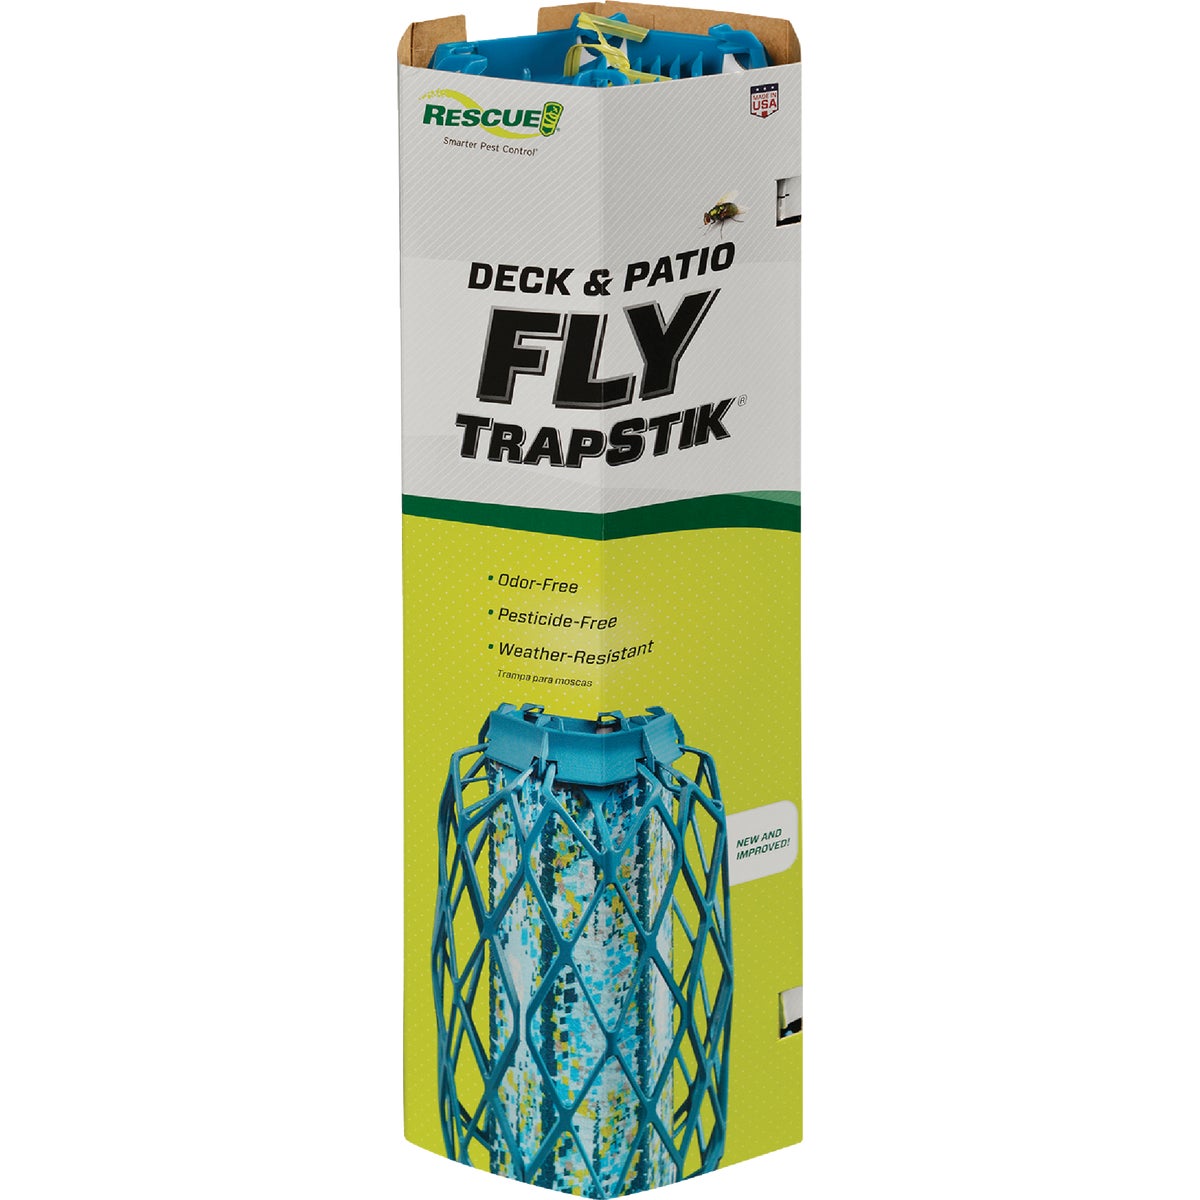 Item 702064, Deck &amp; patio fly trap uses exclusive VisiLure technology to draw 